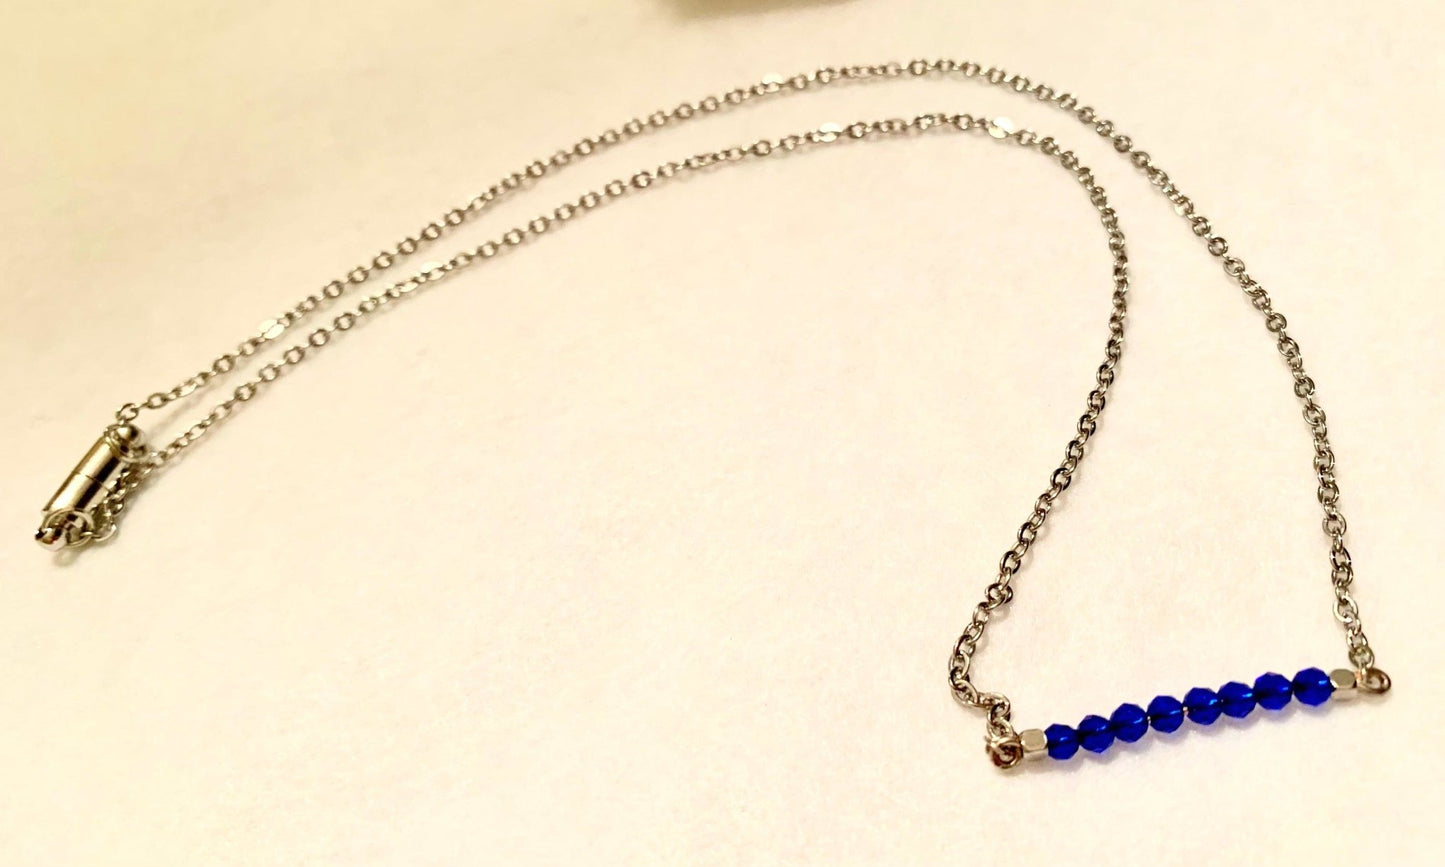 🔴SOLD🔴 Cleo Handmade Dainty Genuine Blue Sapphire Necklace (with Magnetic Clasp) - Born Mystics